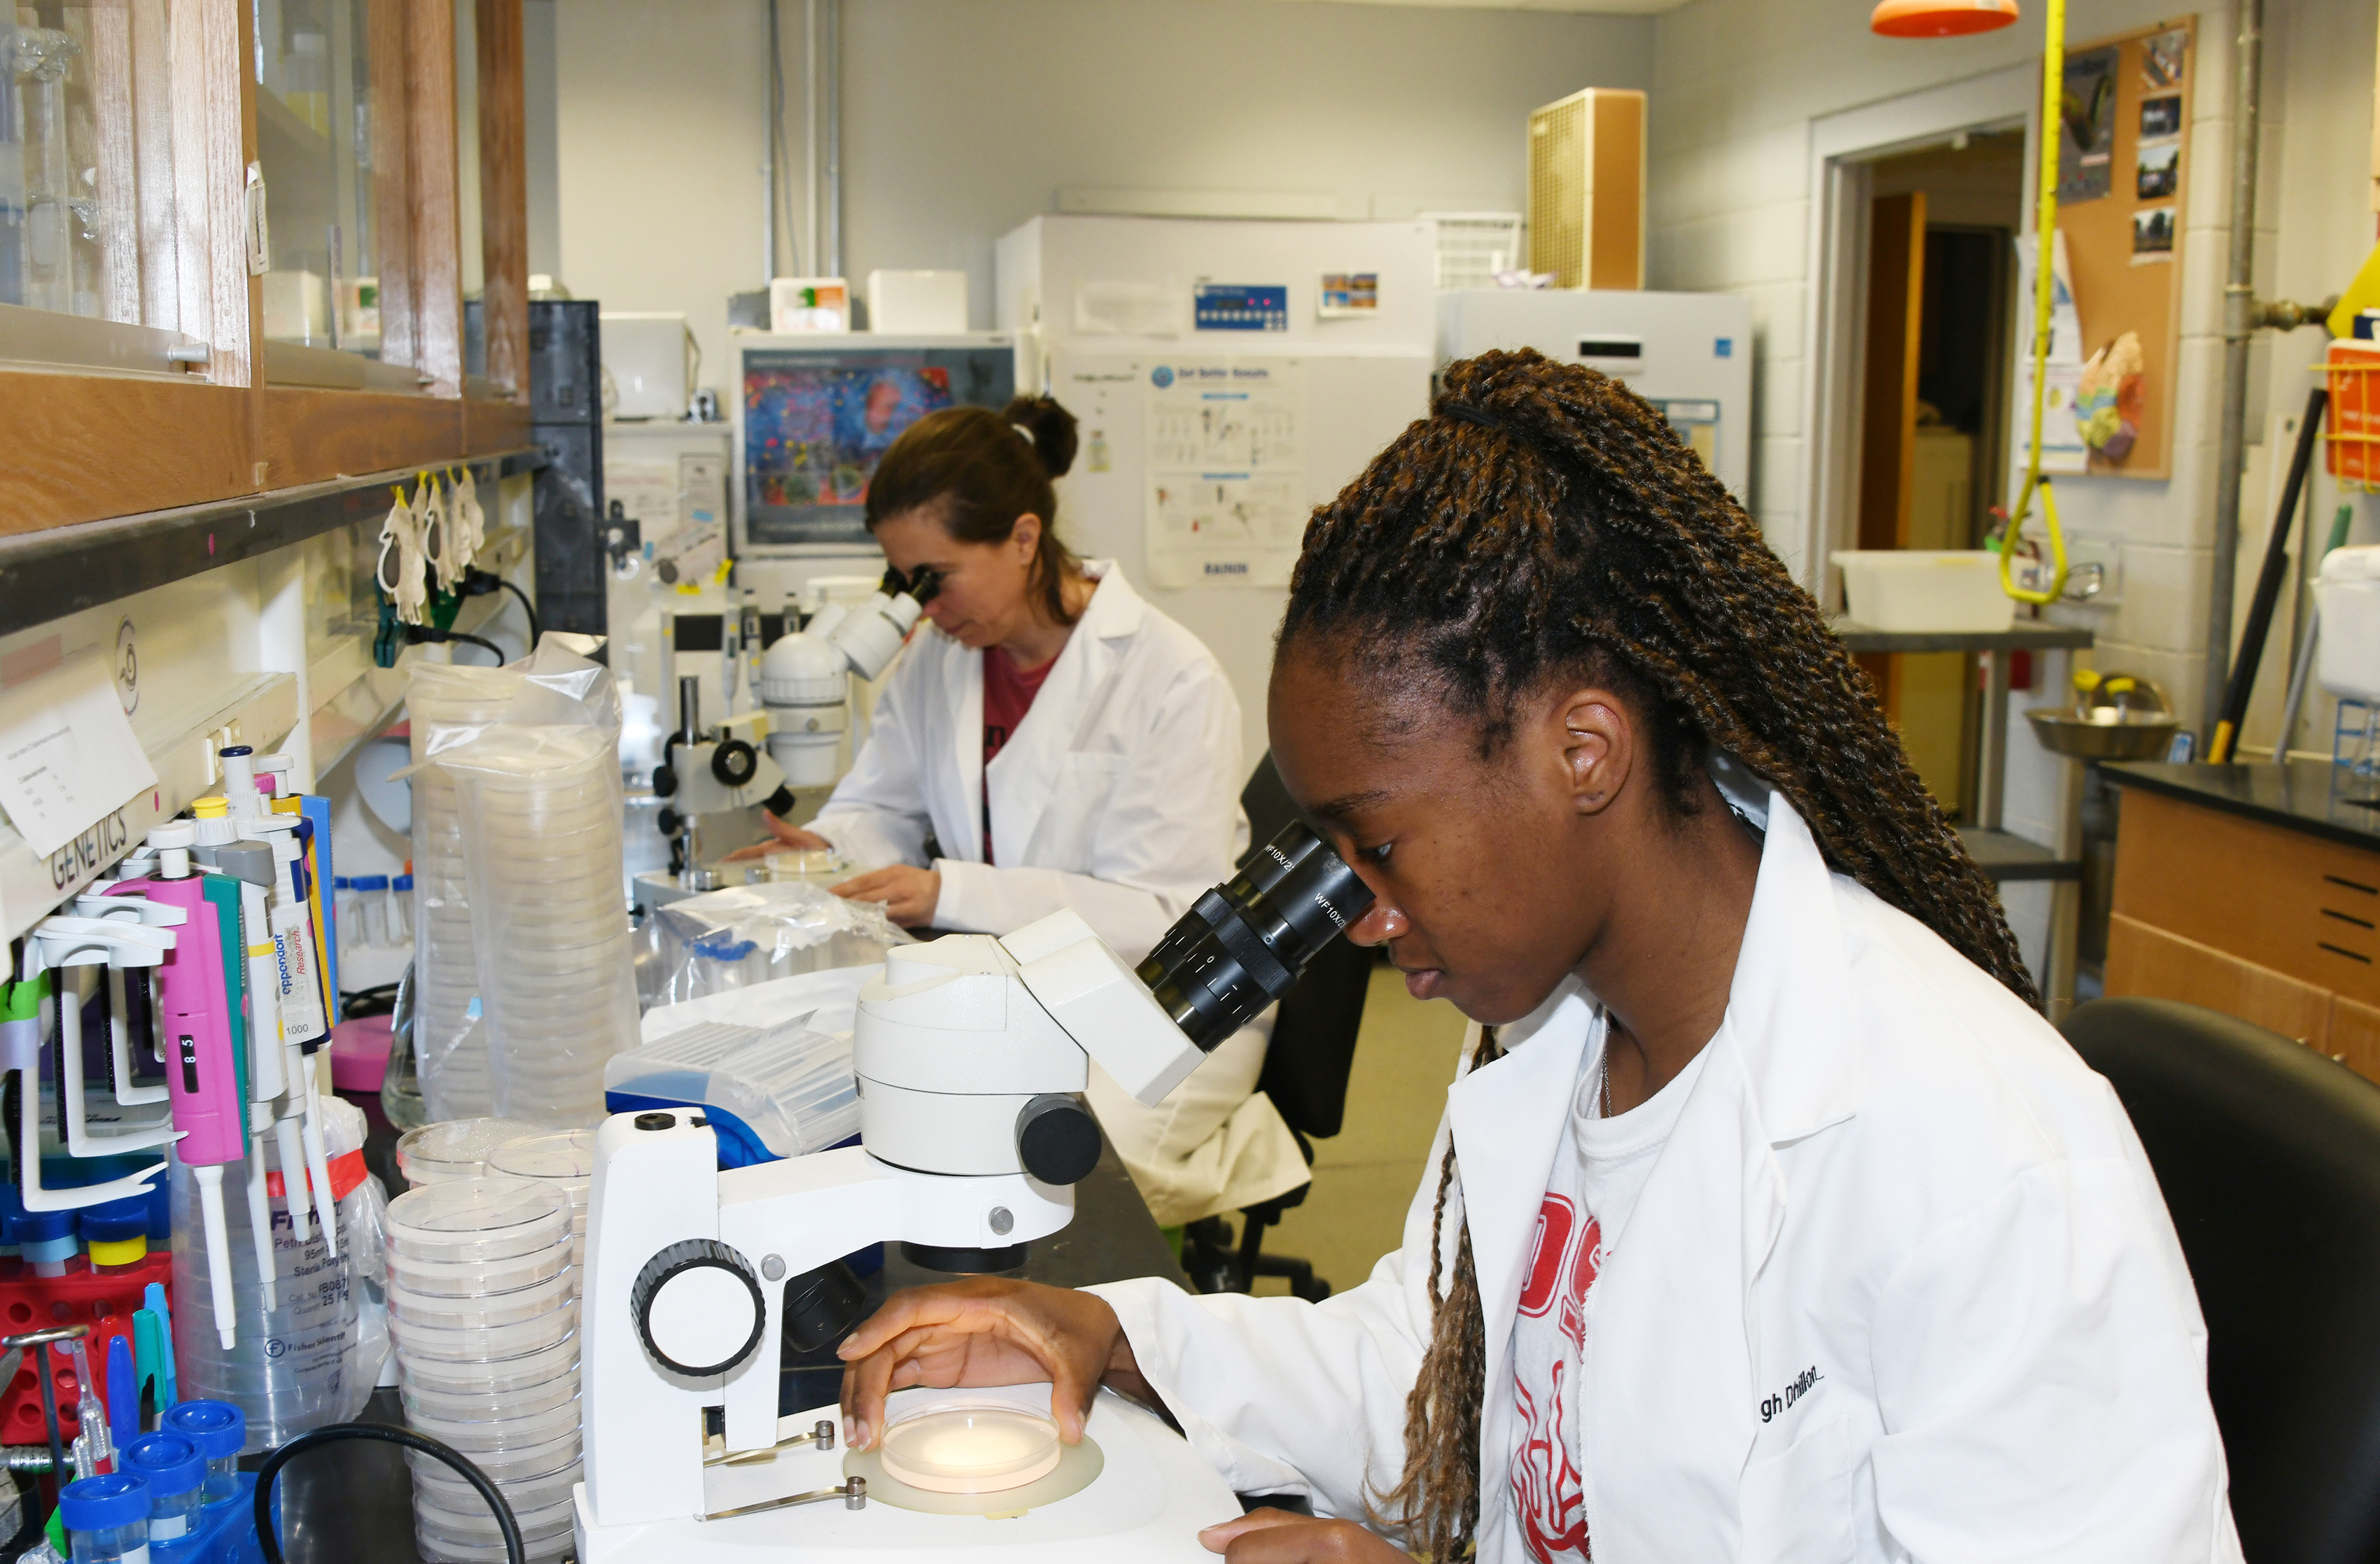 Delaware State University students will now have the opportunity to received biomedical research training that will prepare them for Ph.D. programs and careers as the result of a recent almost $2 million grant from the National Institute of General Medical Sciences.